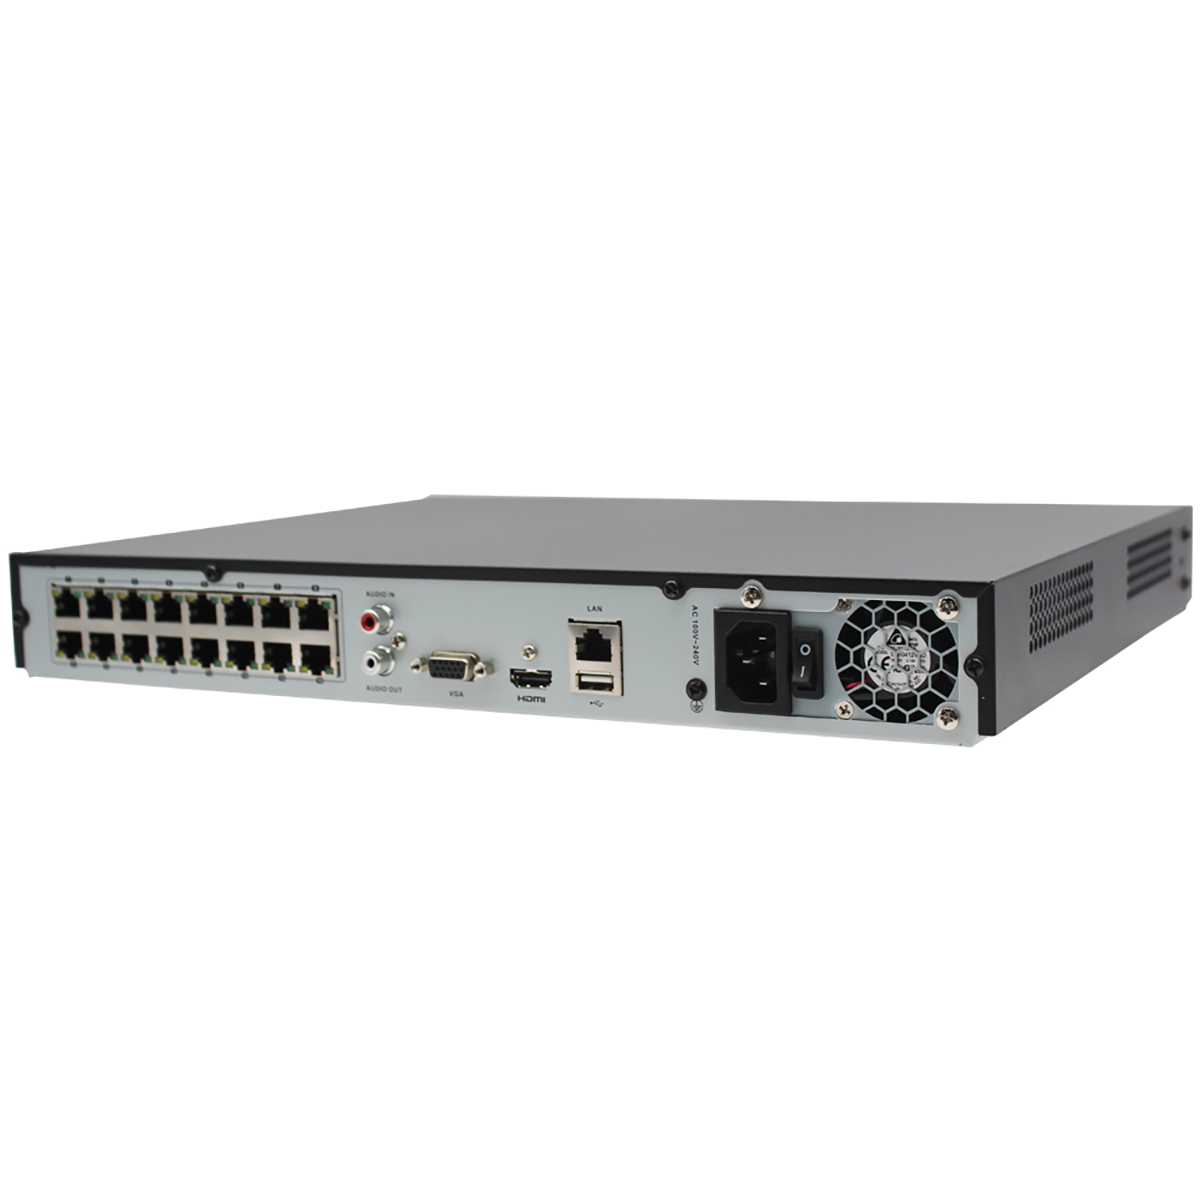 4K Capable GoSwift 16 Channel NVR Recorder for IP Cameras W/Built in POE Swith Pre-Installed 3 TB Hard Drive Onvif Compliant 